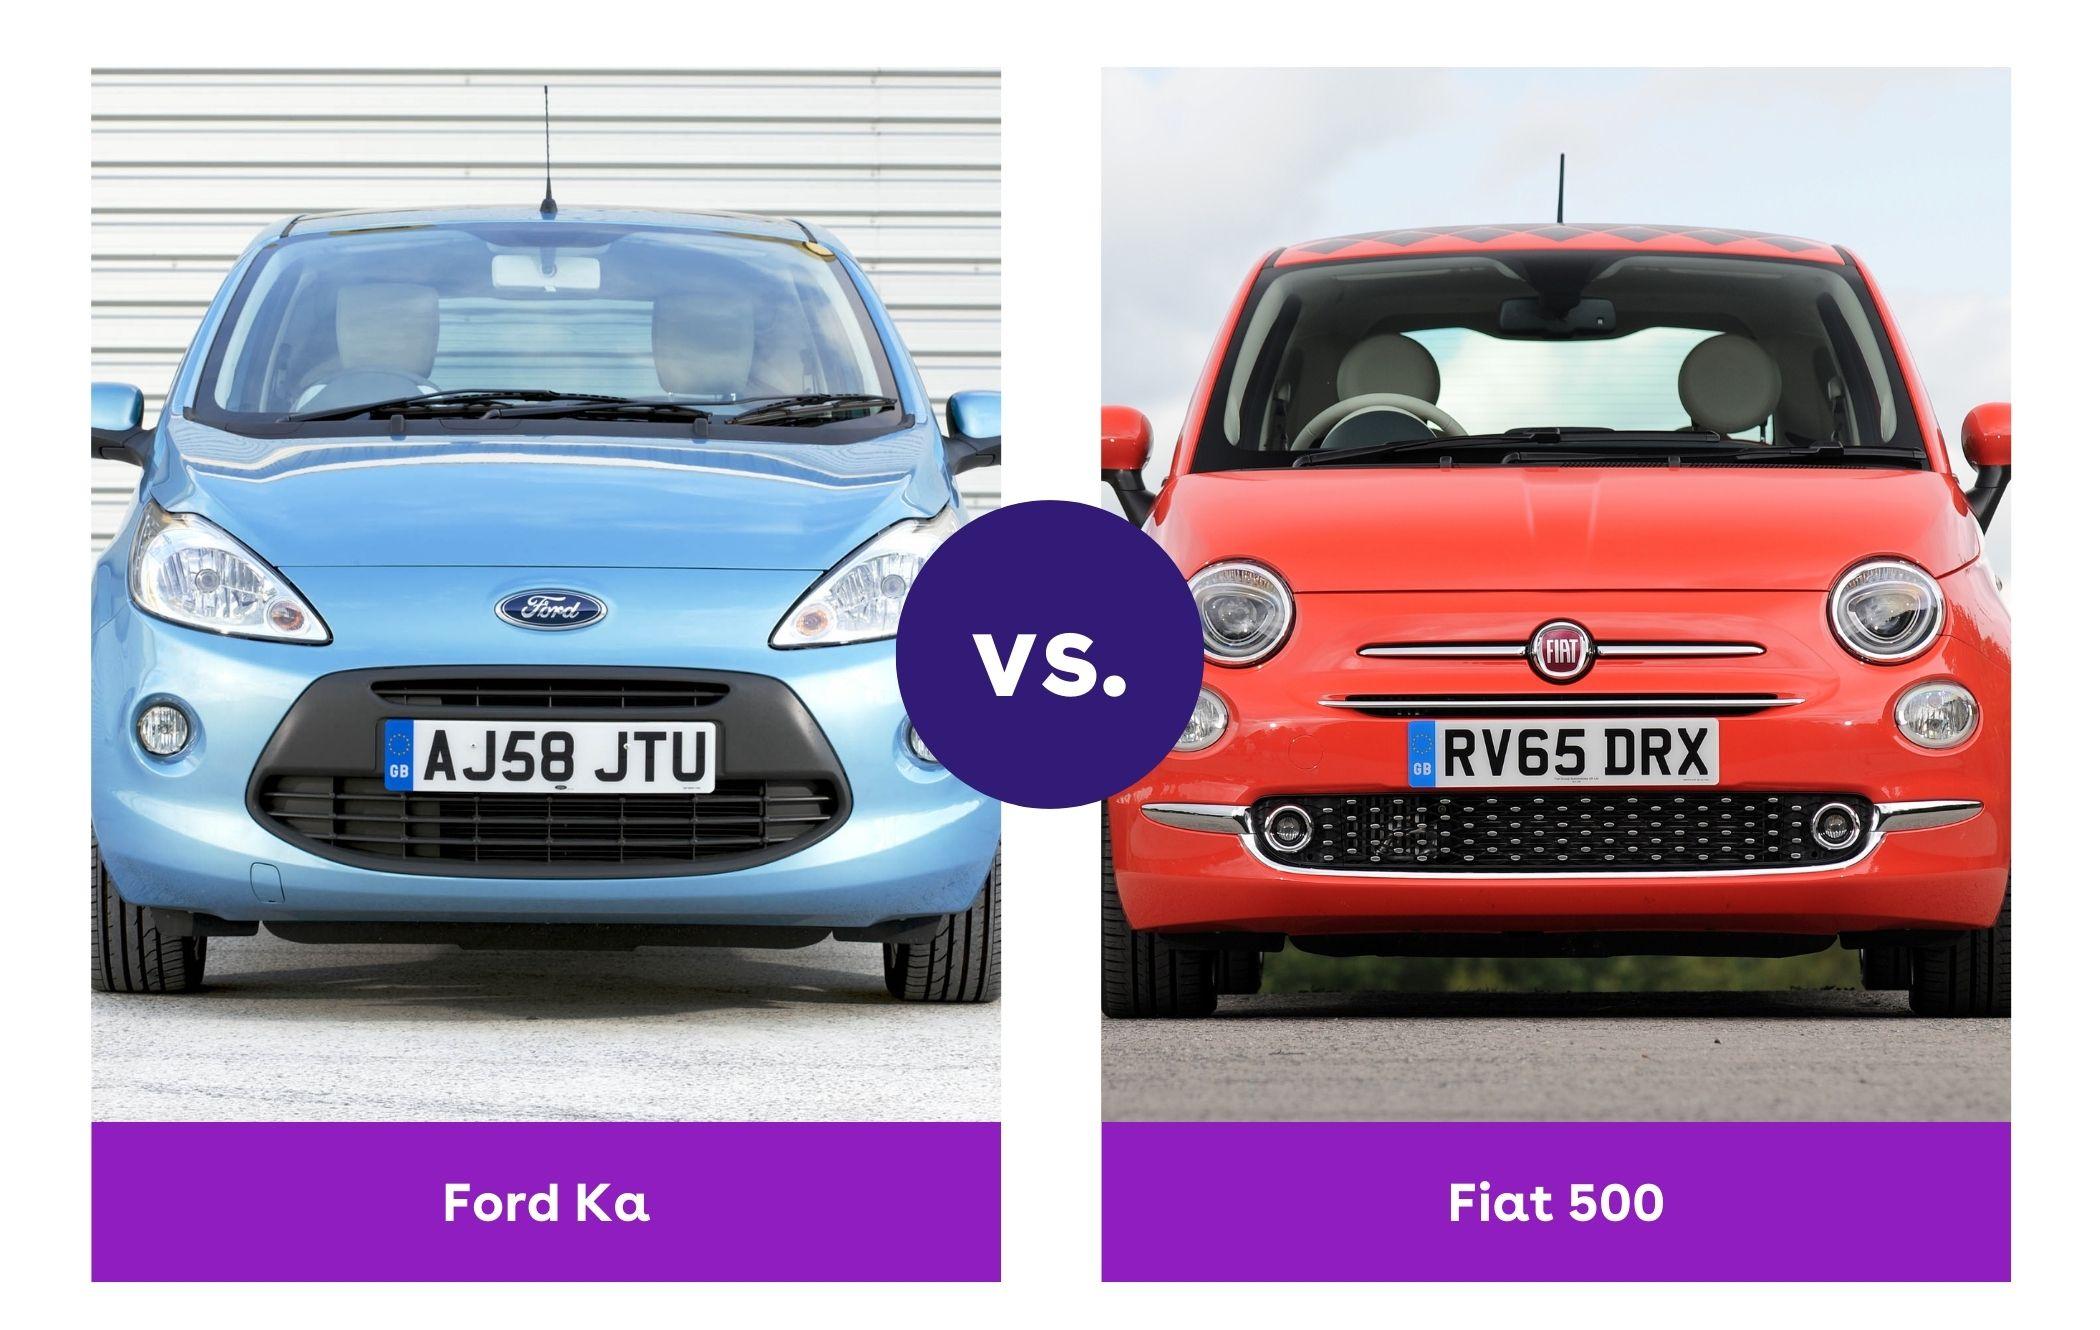 Side-by-side view of Ford Ka and Fiat 500